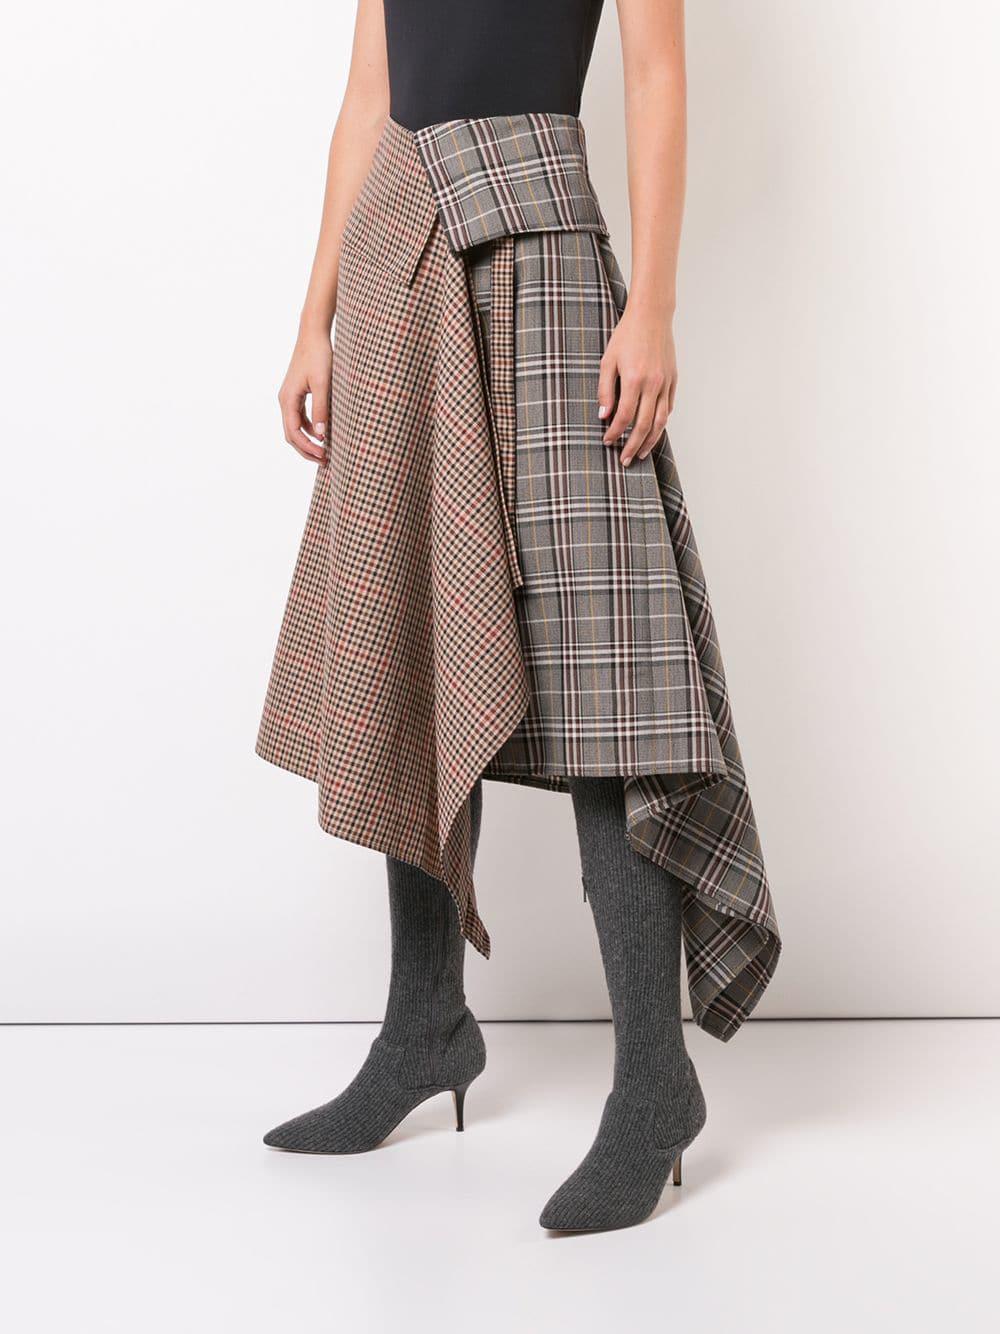 Monse Patchwork Plaid Wrap Skirt in Gray | Lyst